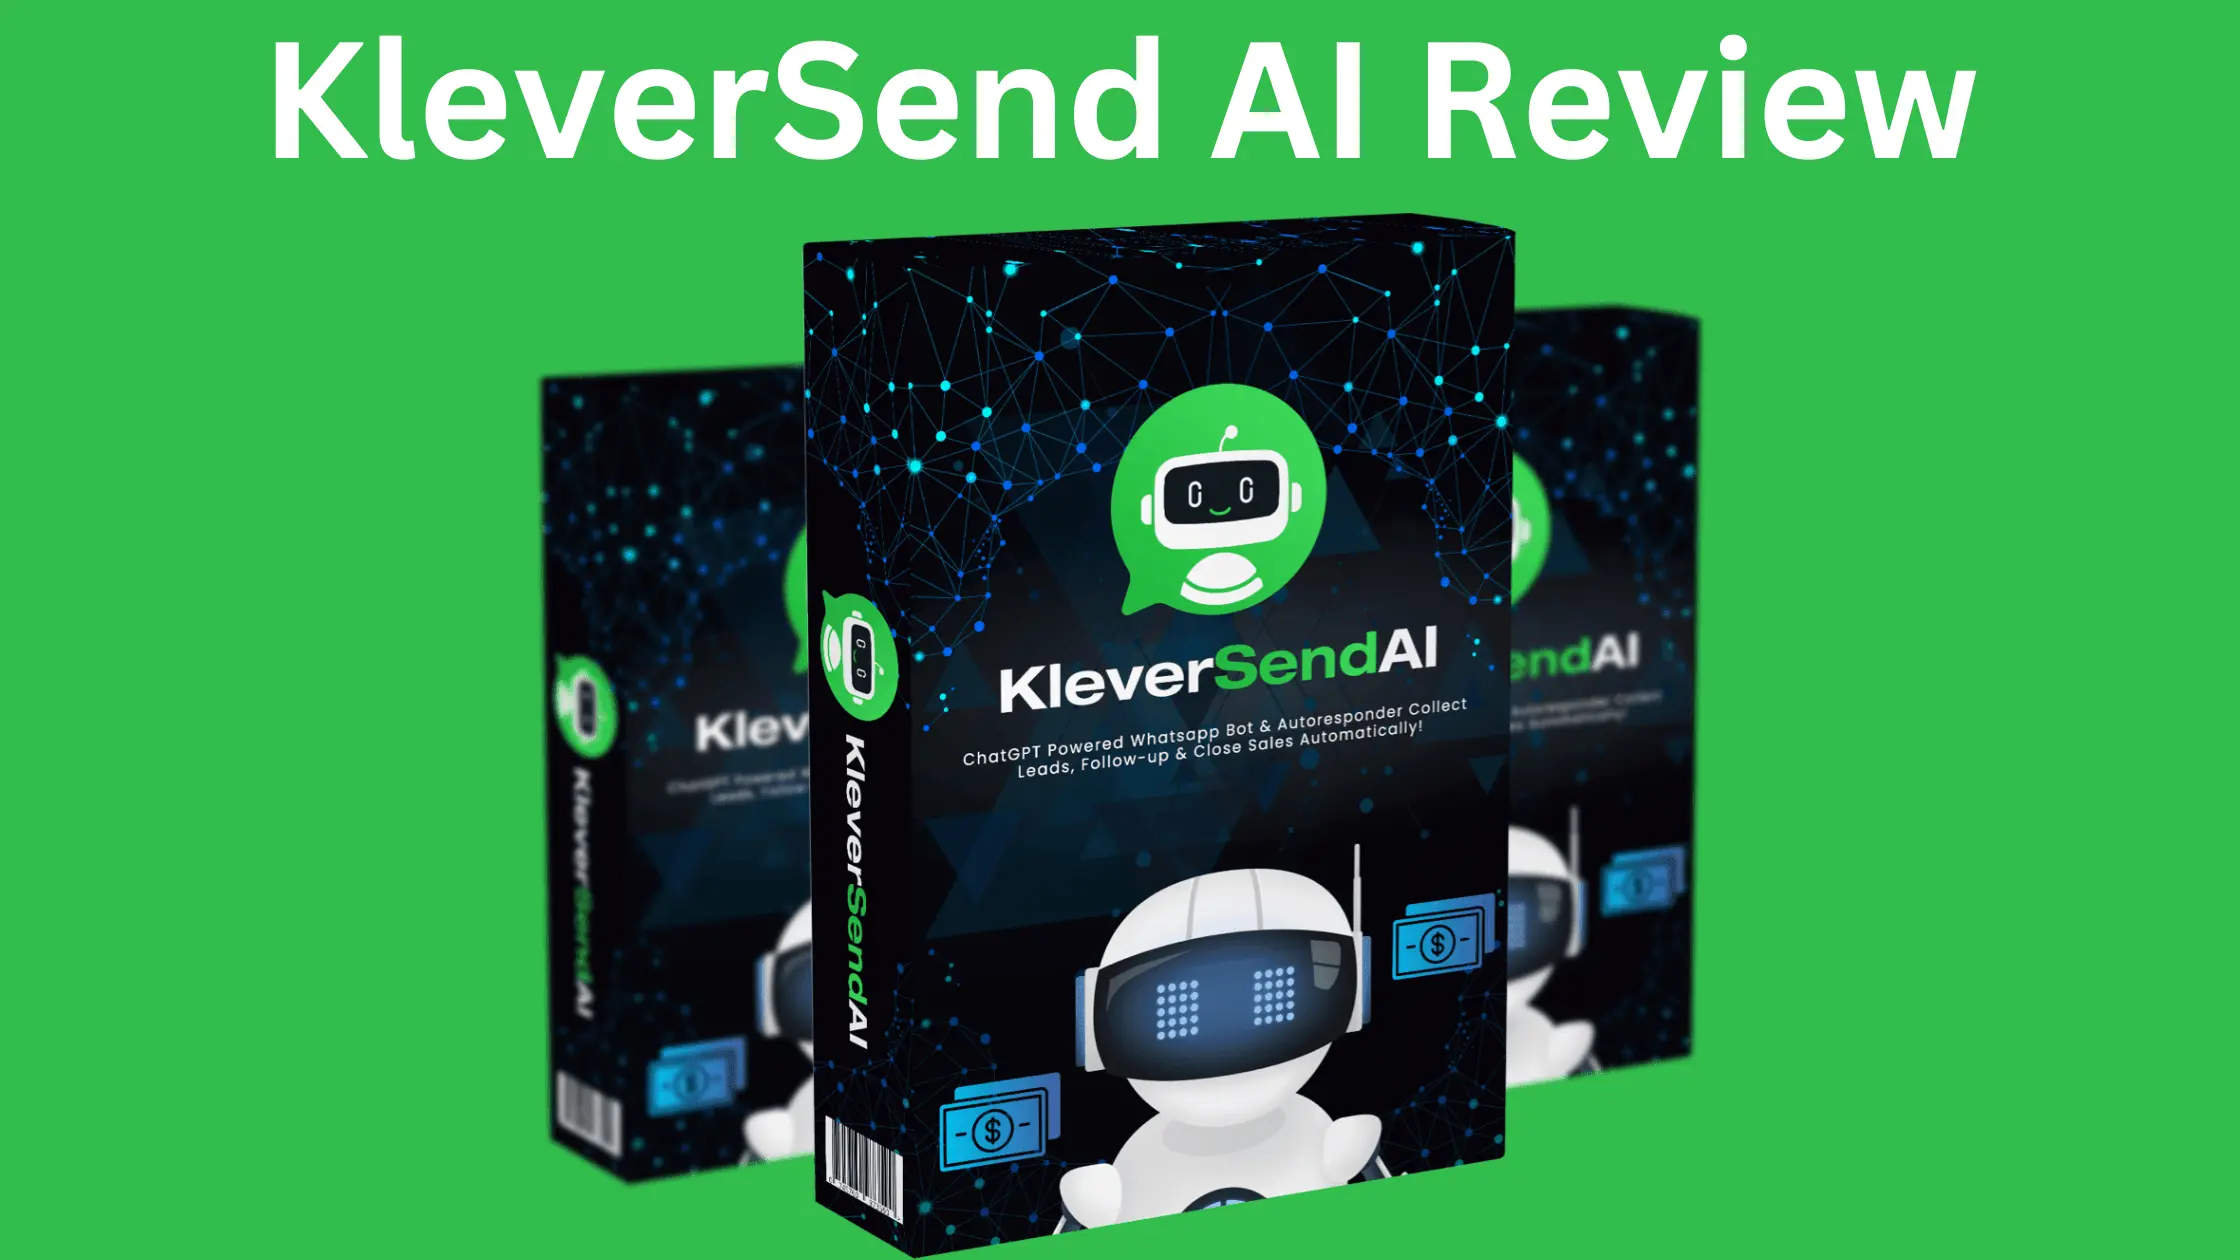 KleverSend AI Review